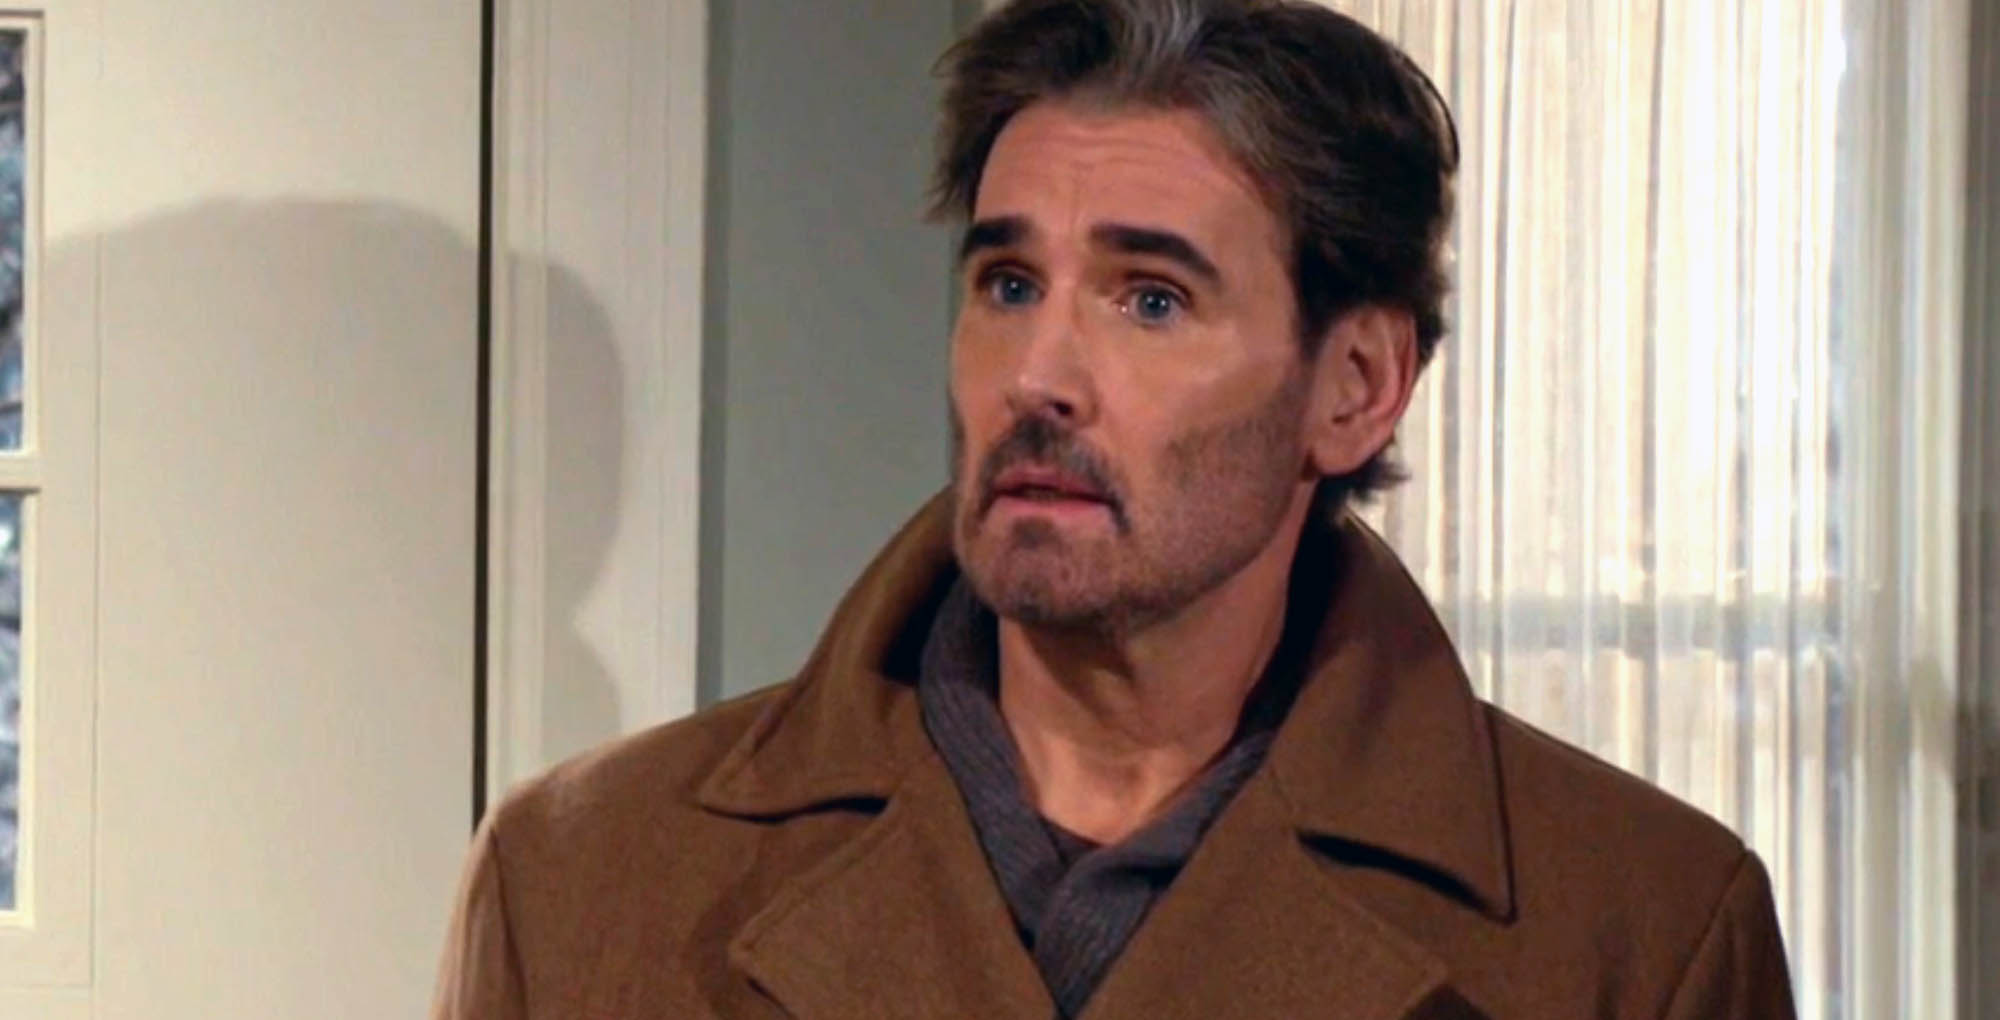 j. eddie peck as cole howard on young and the restless.